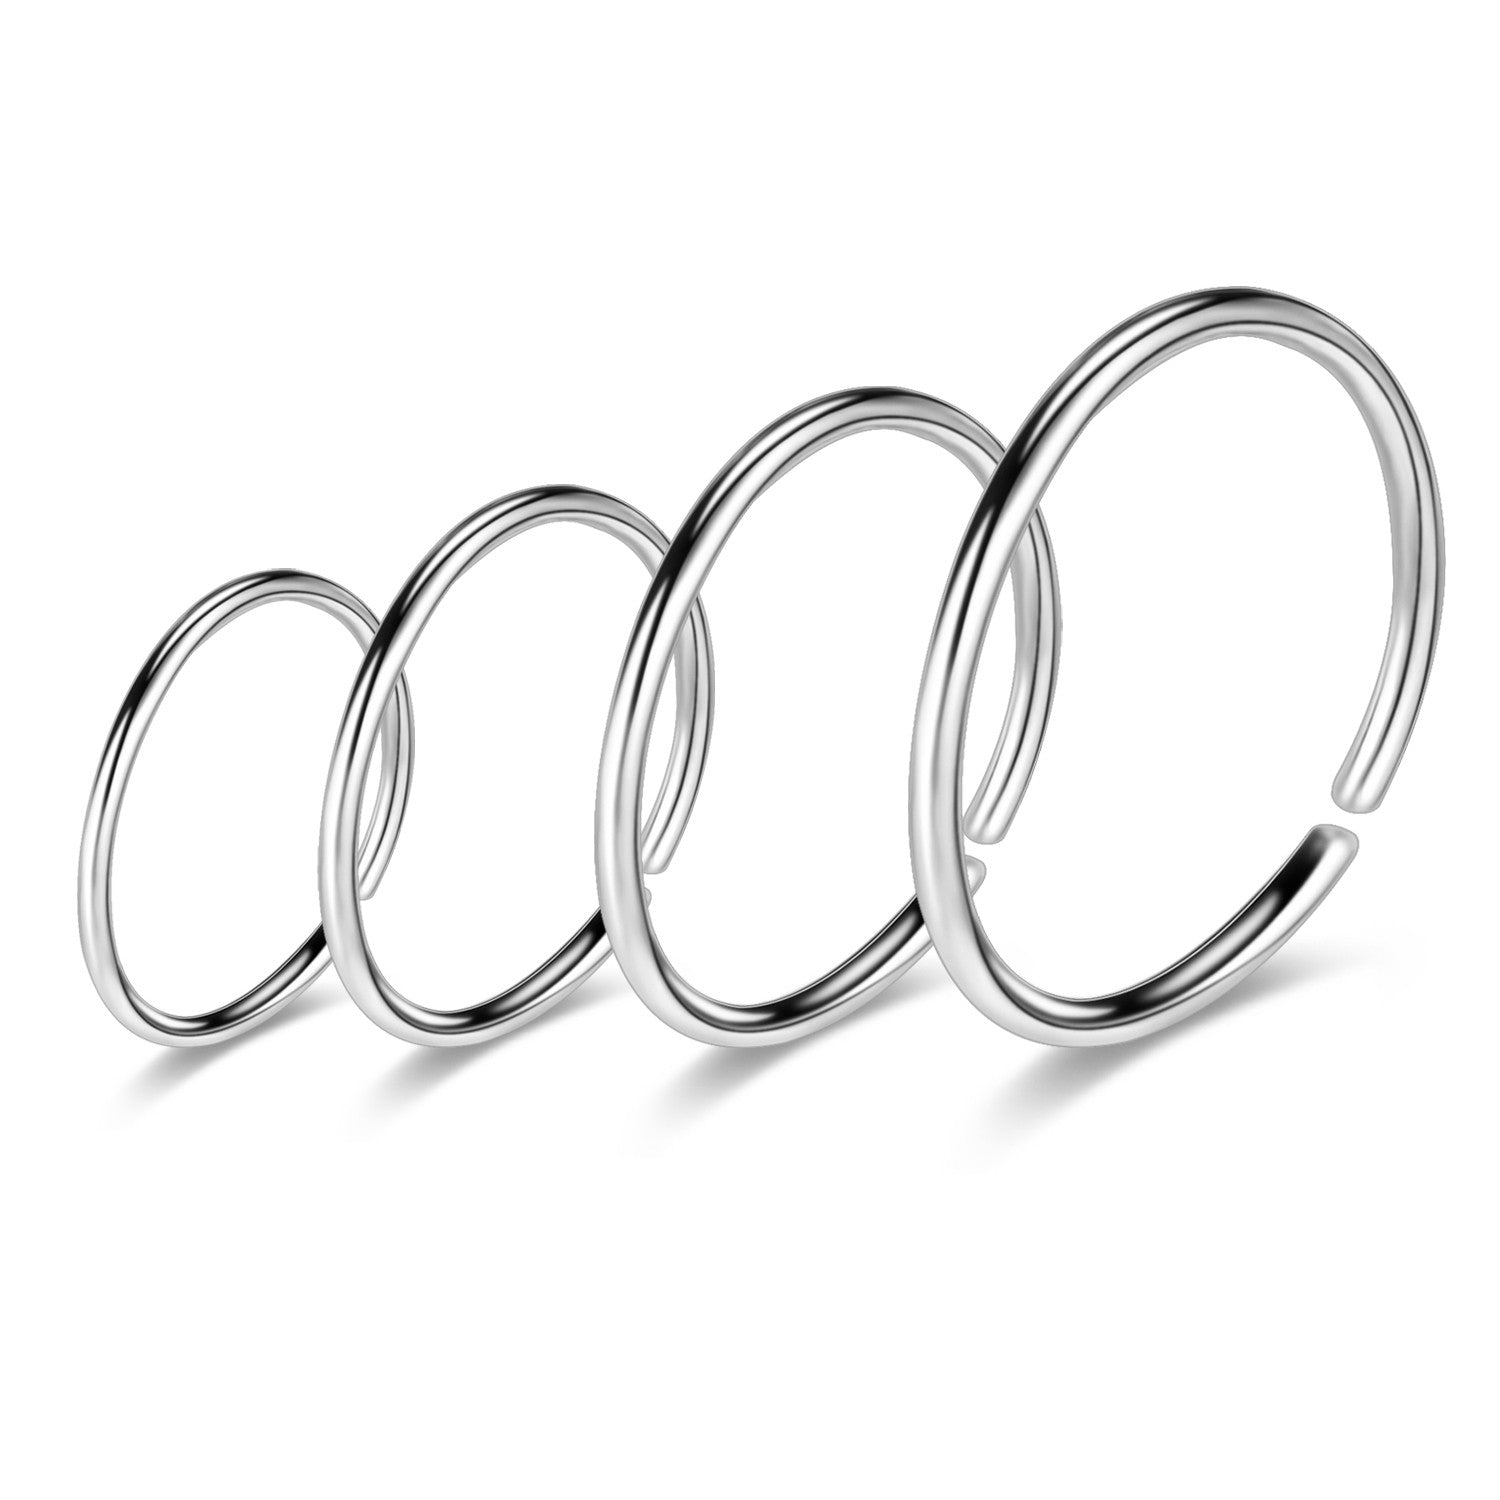 20G Nose Hoop Clicker Ring Open Stainless Steel Cartilage Helix Piercing